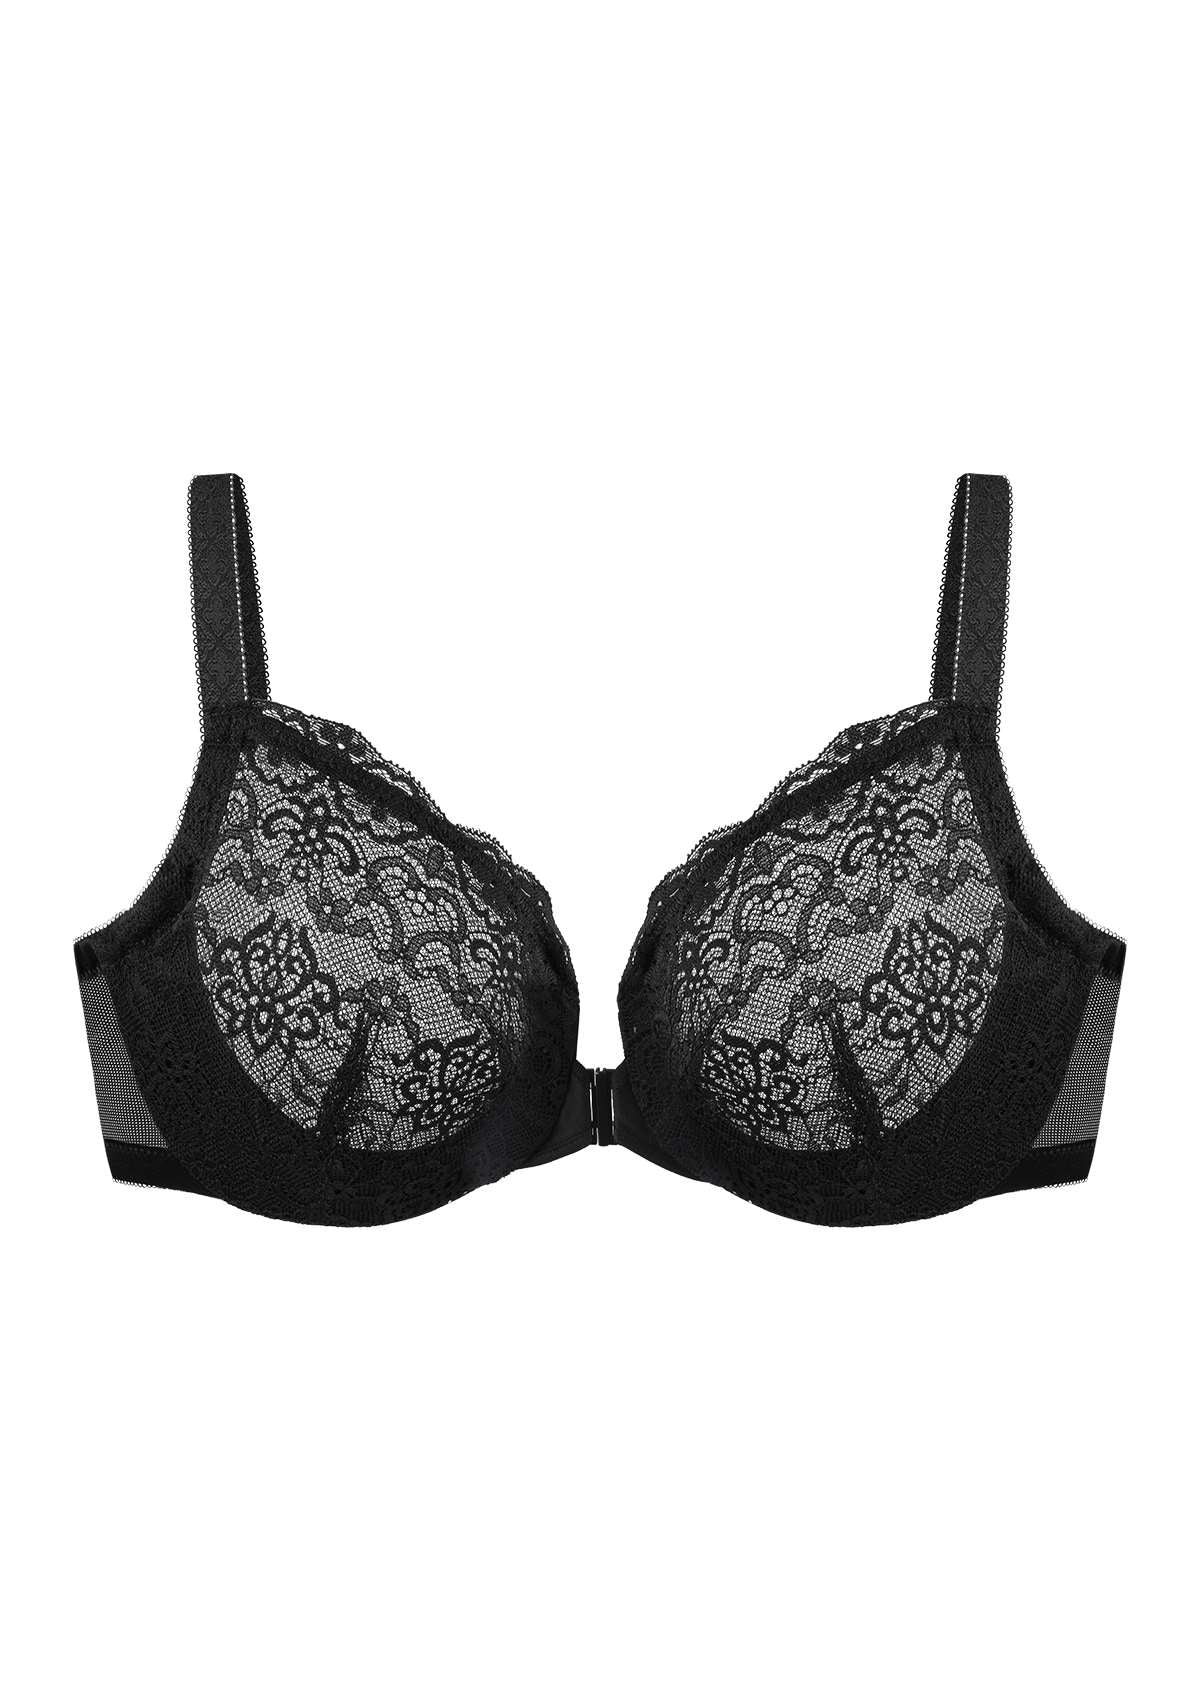 HSIA Nymphaea Front-Close Unlined Retro Floral Lace Back Smoothing Bra - Black / 40 / DD/E